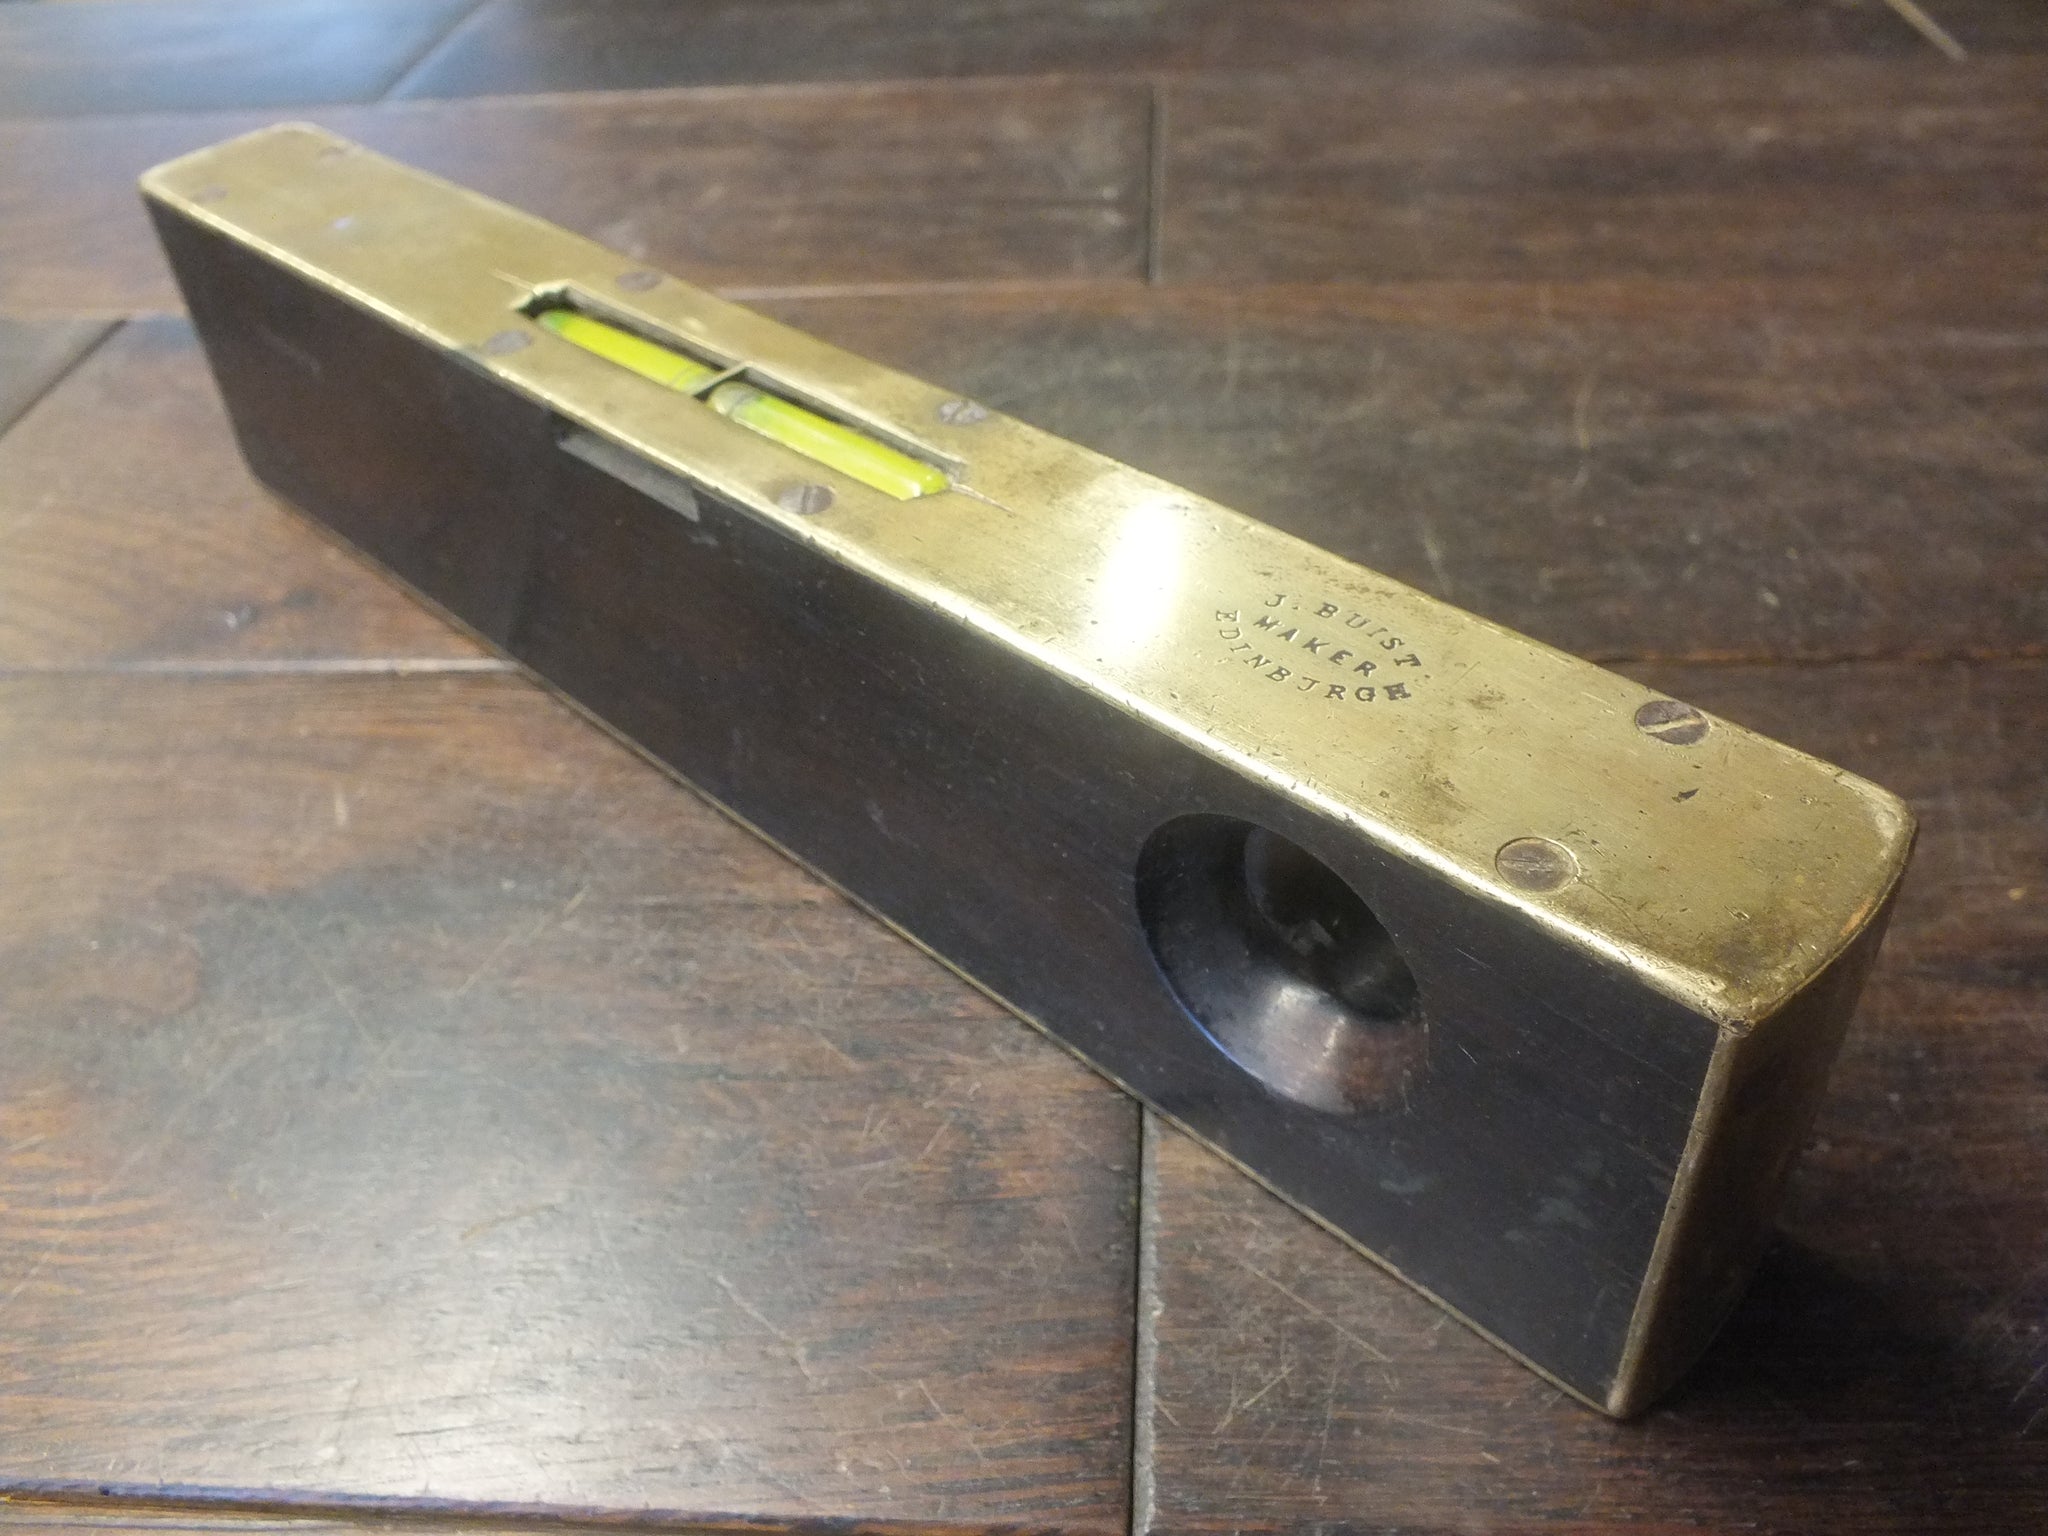 Sighting Level. In original metal case. J Buist, Edinburgh. Full working order with both bubbles fully working. Brass and rosewood. Very exciting sighting.  46294